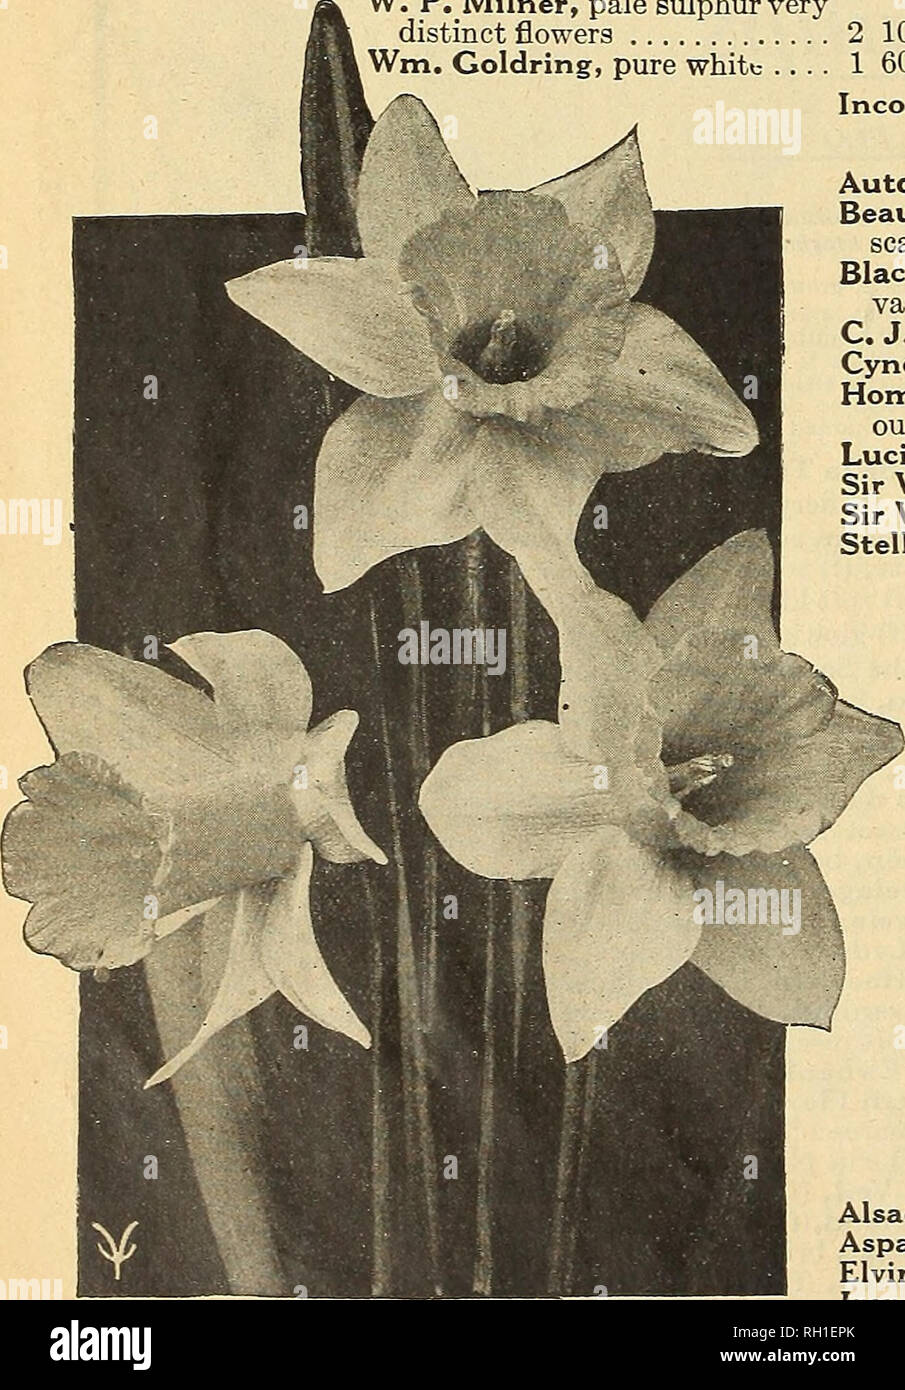 . Bulbs for florists and seedsmen. Flowers Seeds Catalogs; Bulbs (Plants) Seedlings Catalogs; Vegetables Seeds Catalogs; Trees Seeds Catalogs; Horticulture Equipment and supplies Catalogs. ALL WHITE White perianths, with white or sulphur trumpets, which change to white as the flowers mature. per 100 Mme. de Graaff, largest pure white, creamy trumpet 5 50 Mrs. Thompson, a very early pure white 1 75 W. P. Milner, pale sulphur very distinct flowers 2 10 i Wm. Goldring, pure white .... 1 60 Per 1000 50 00 15 00. ARCISSUS MME. de GRAAFF MEDIUM AND SMALL CUPS -Small Cupped Varieties Per 100 NARCISSU Stock Photo